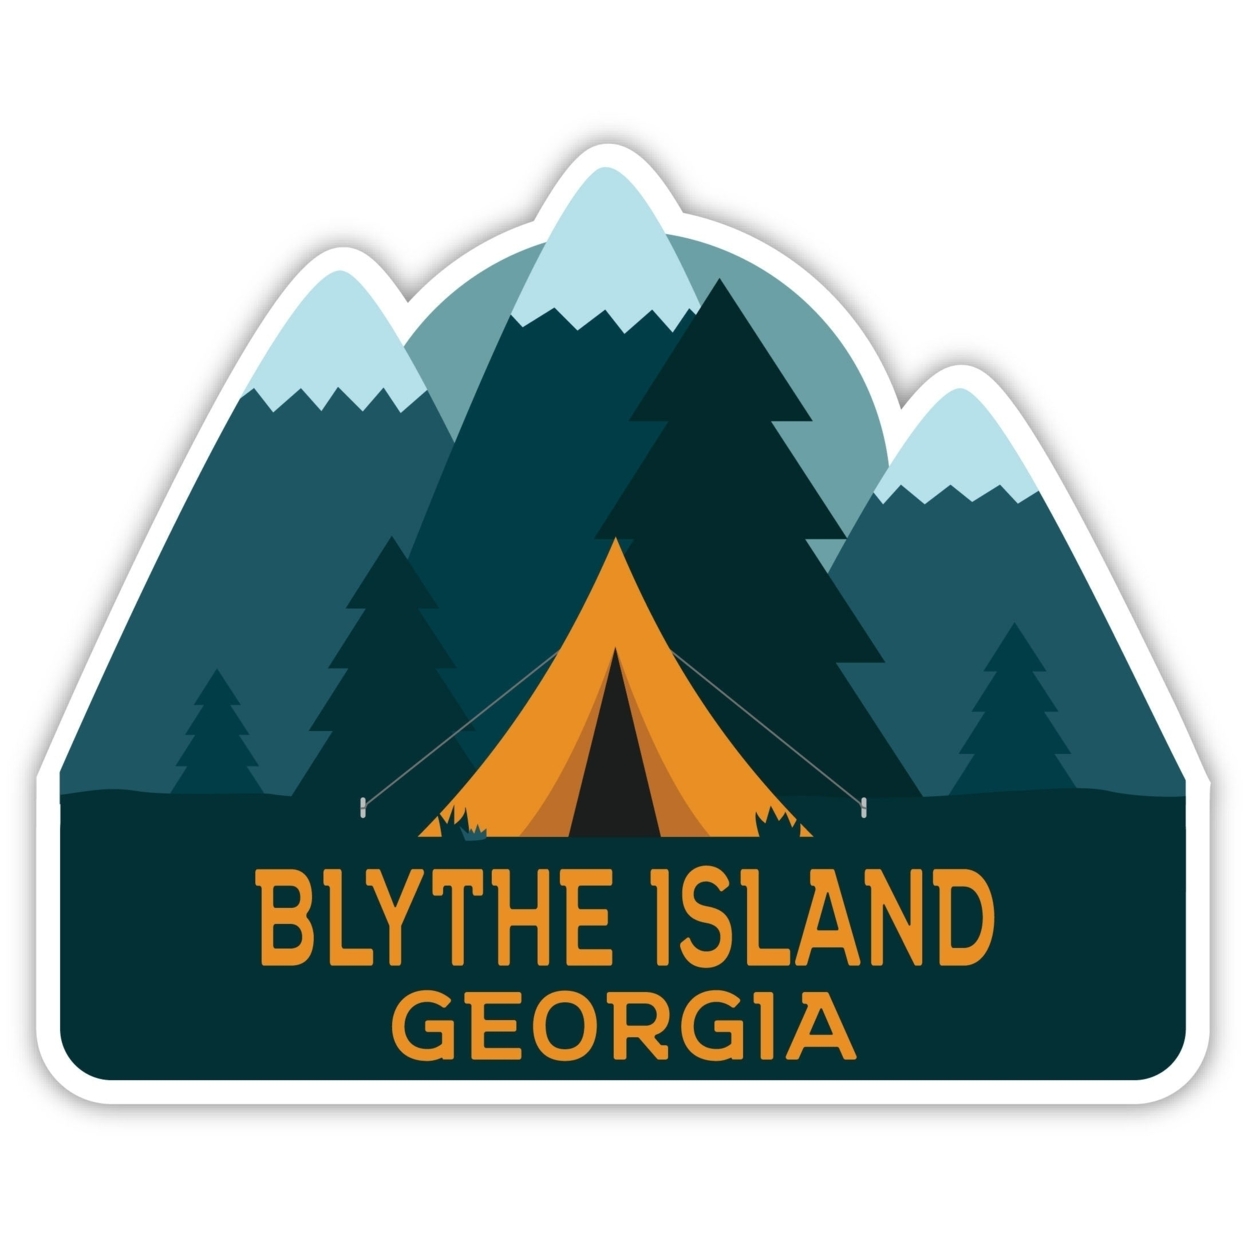 Blythe Island Georgia Souvenir Decorative Stickers (Choose Theme And Size) - 4-Pack, 10-Inch, Tent